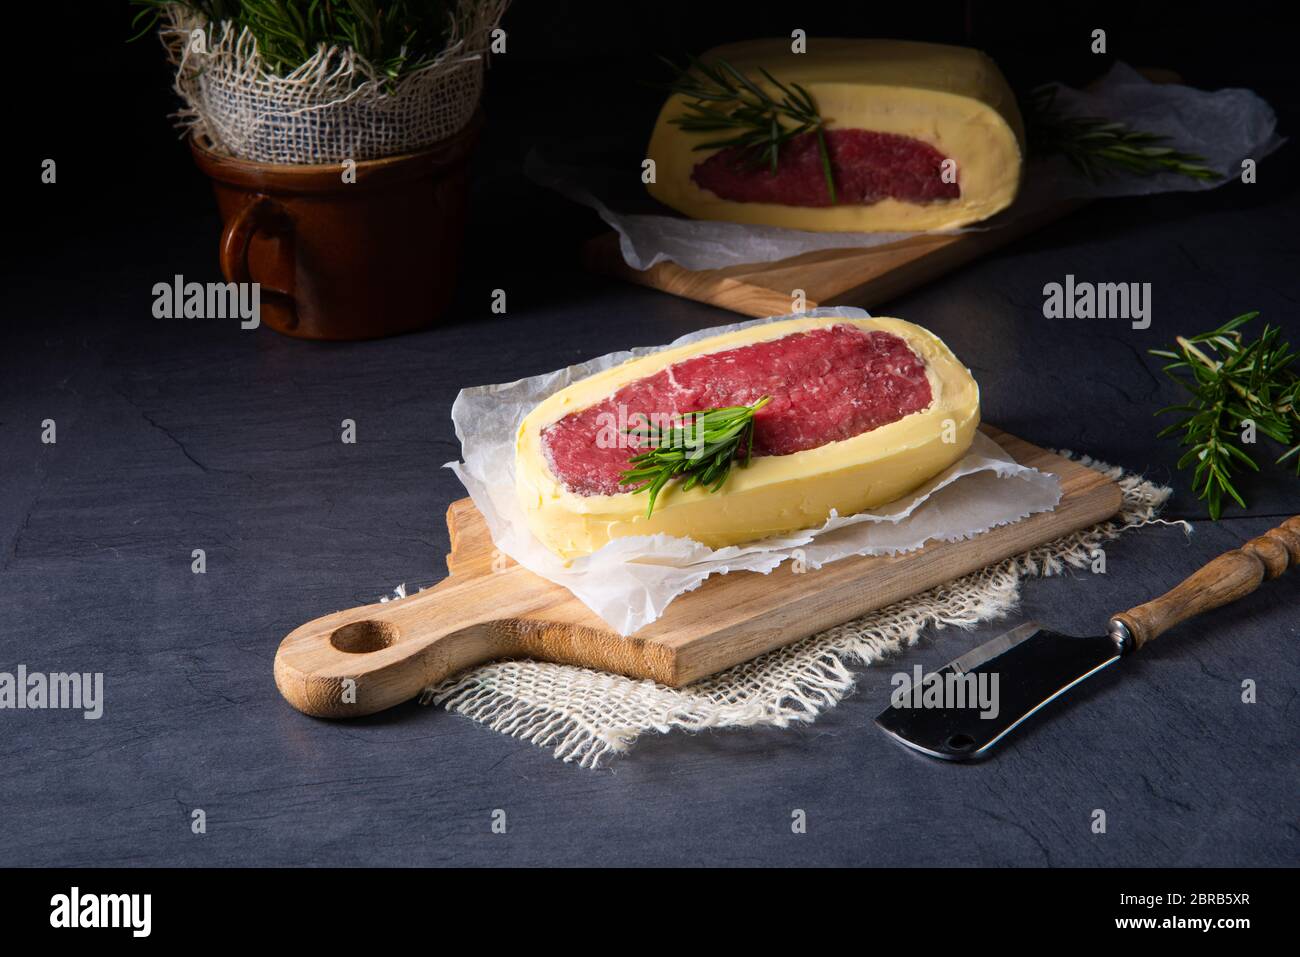 Steaks matured in butter refined with sea salt Stock Photo